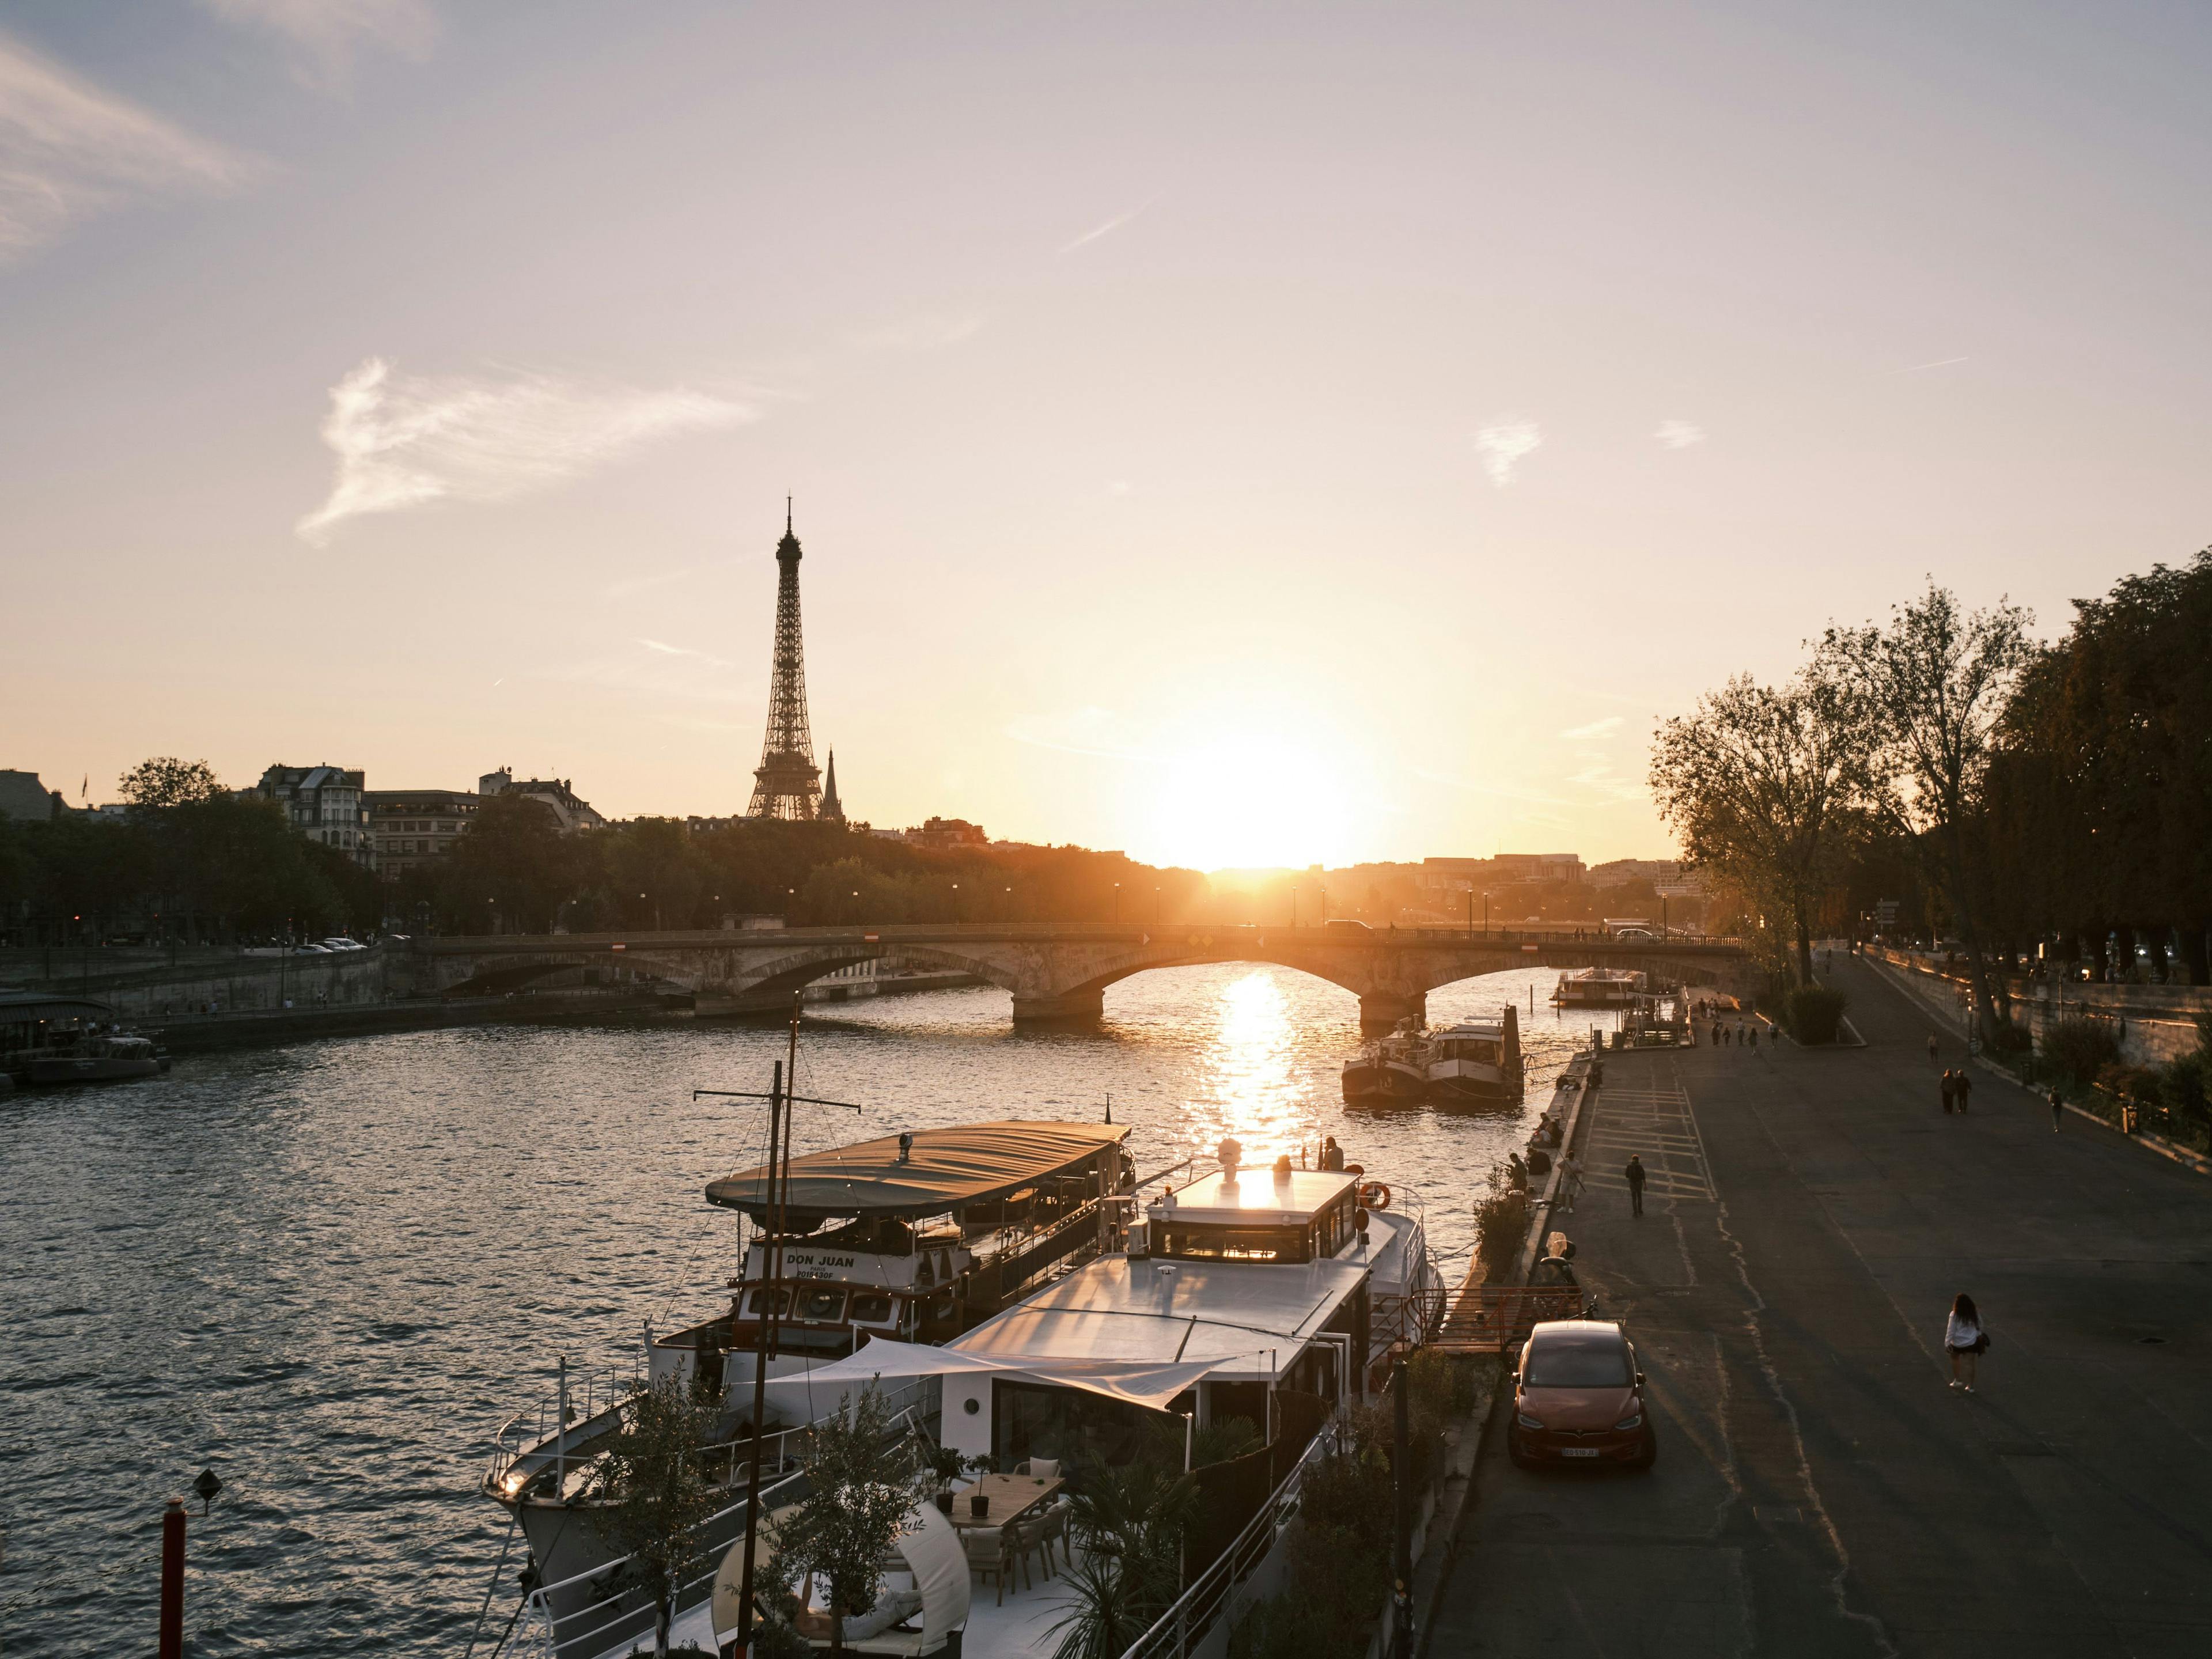 The Seine river looking towards the Eiffel Tower. The sun is setting behind the bridges creating a golden light